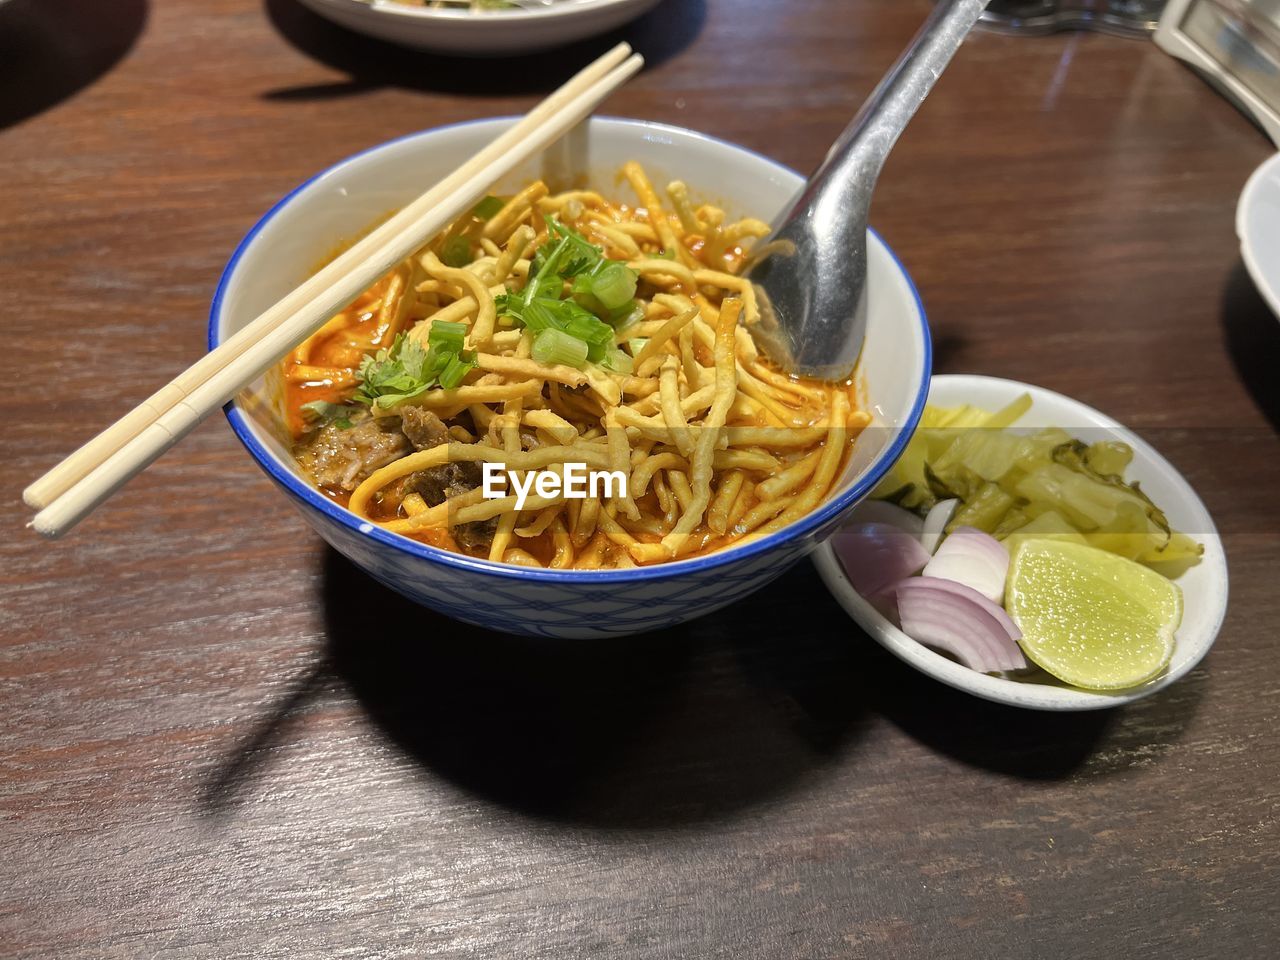 food and drink, food, pasta, italian food, healthy eating, bowl, table, dish, wellbeing, noodle, freshness, cuisine, indoors, kitchen utensil, no people, asian food, meal, vegetable, eating utensil, high angle view, wood, chopsticks, plate, spoon, crockery, lunch, still life, household equipment